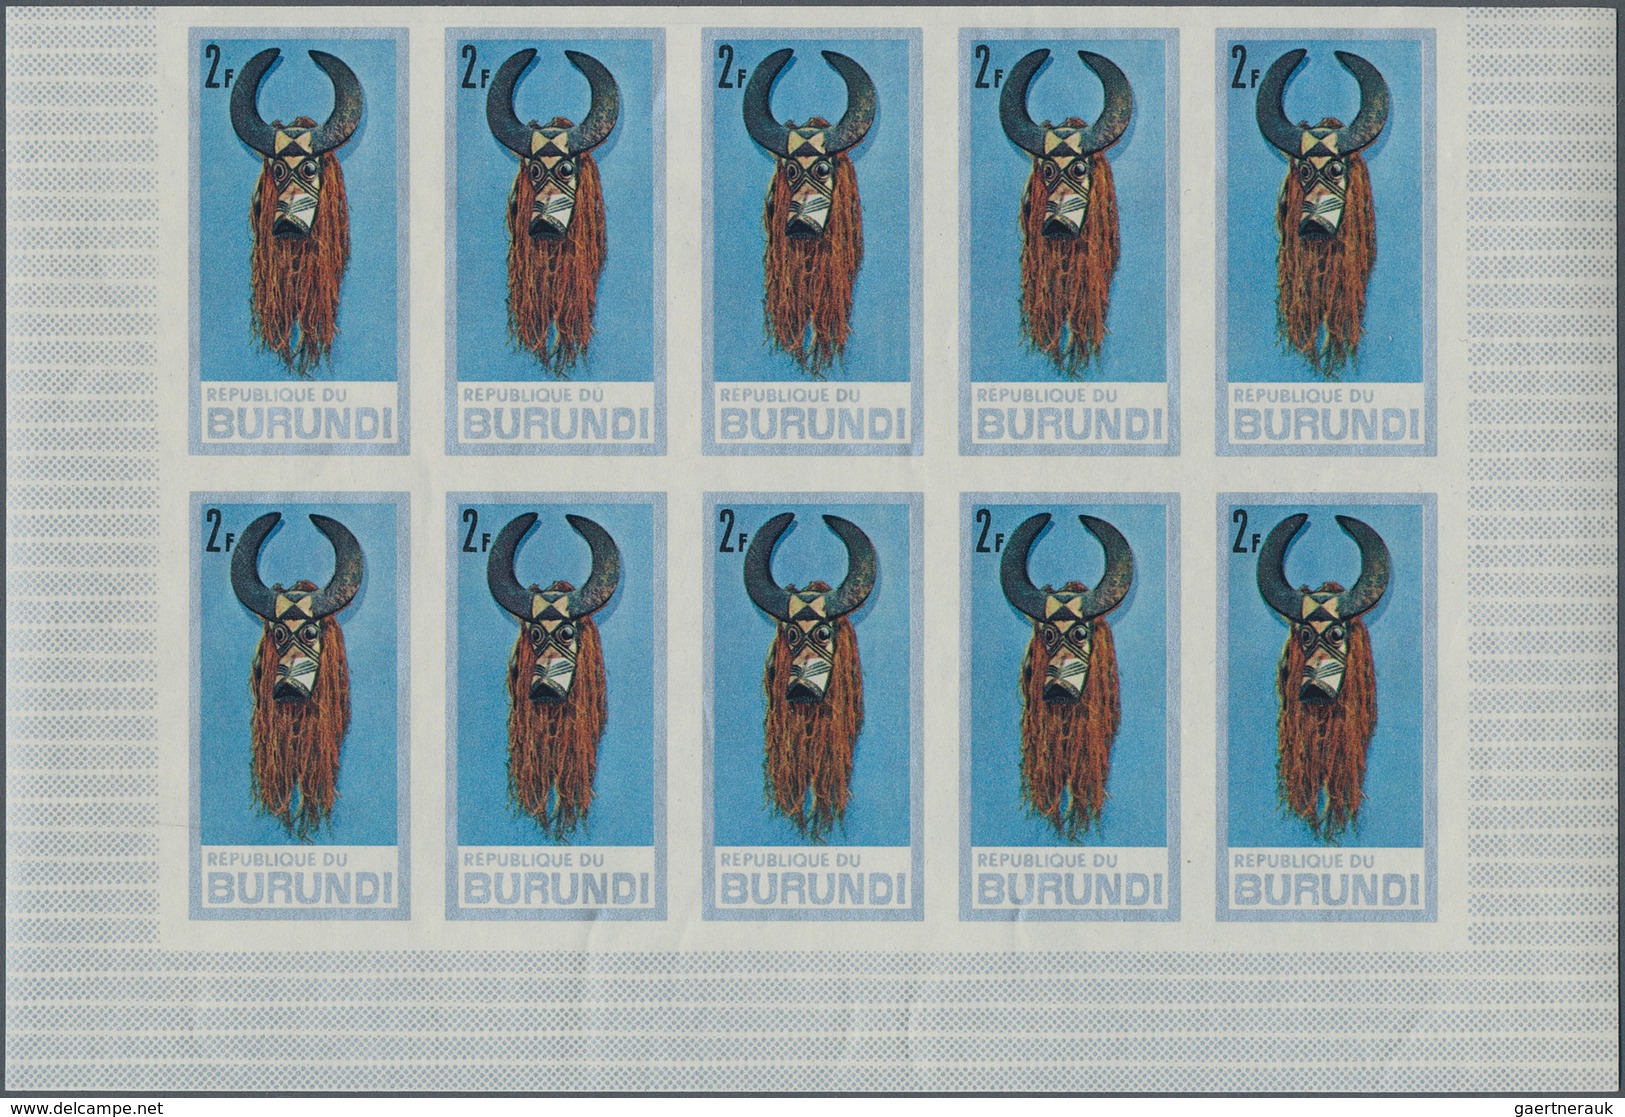 Burundi: 1966/1970, Lot Of 5756 IMPERFORATE (instead Of Perforate) Stamps MNH, Showing Various Topic - Verzamelingen